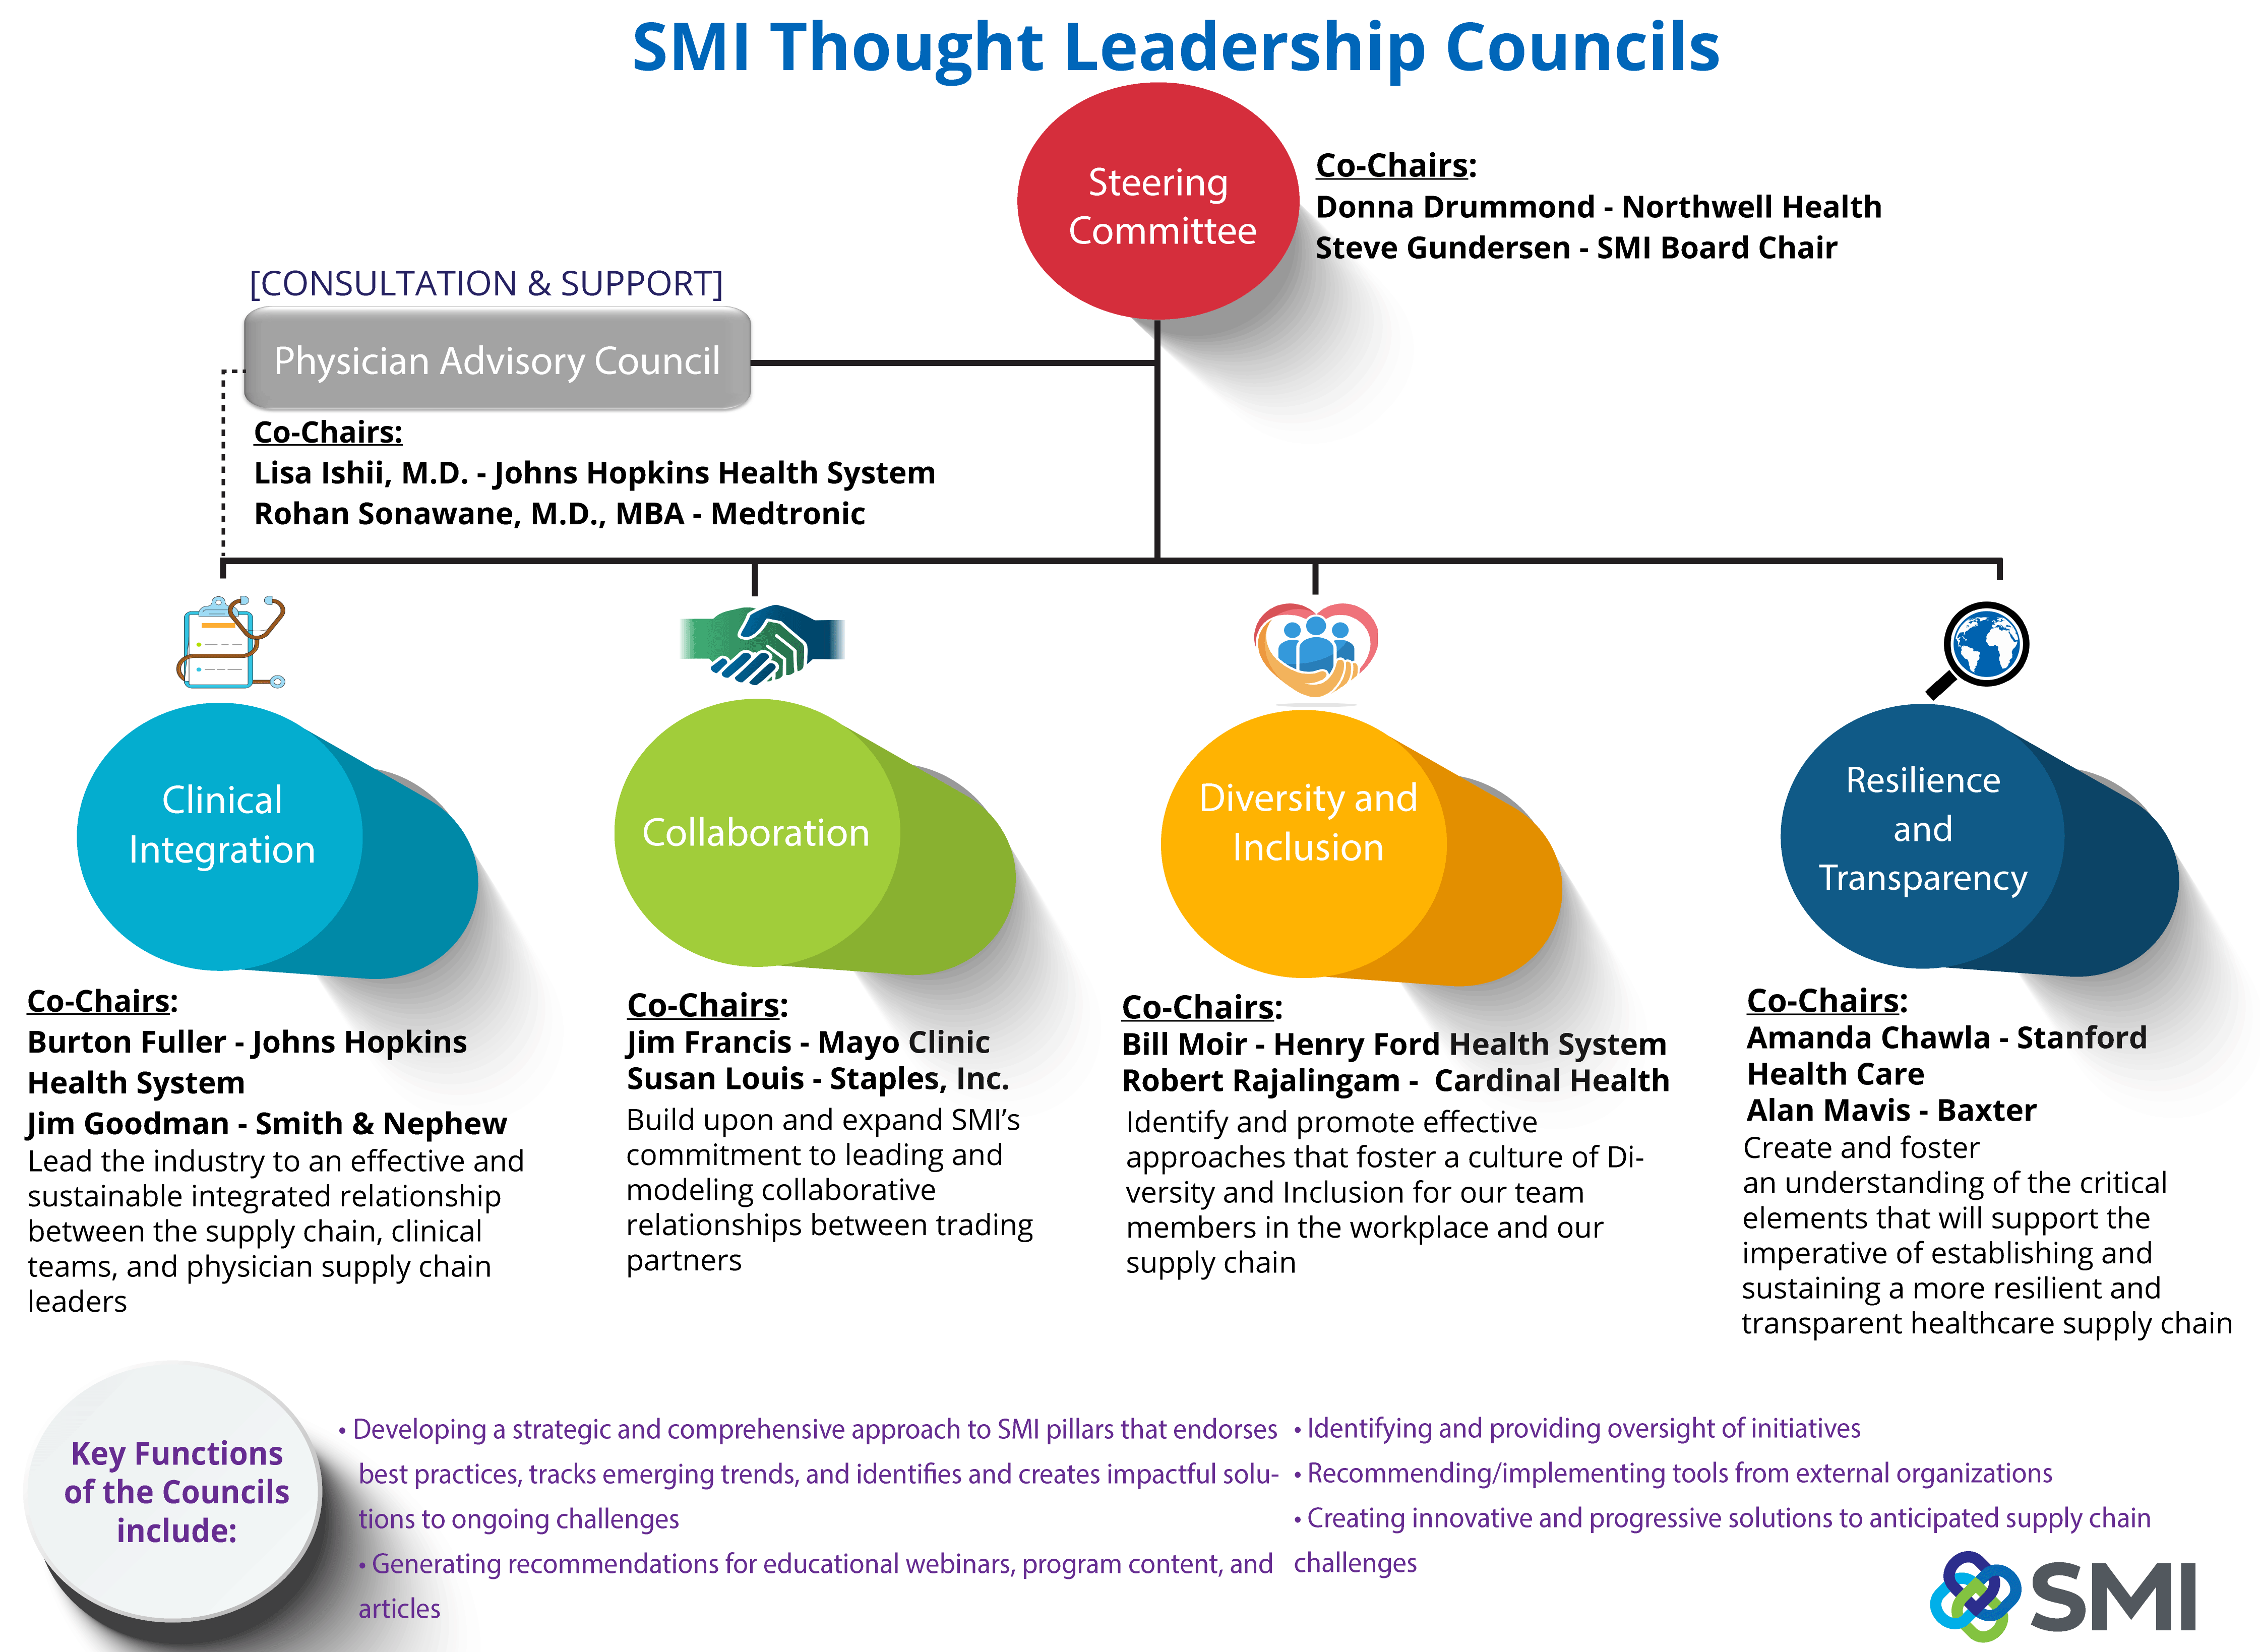 SMI Thought Leadership Councils